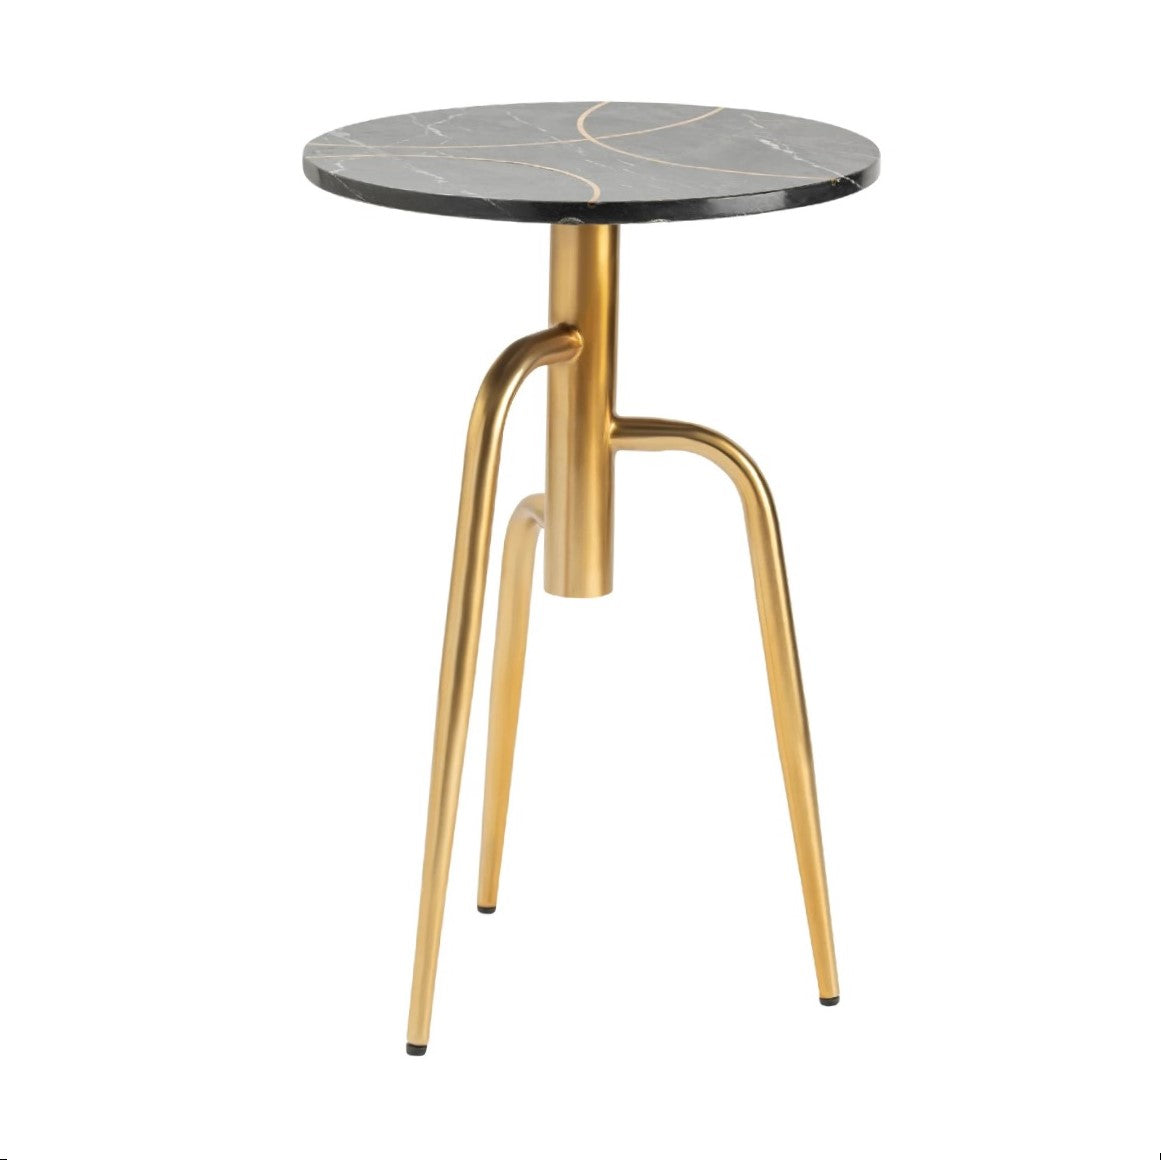 Crestview Collection Ava 16" x 16" x 25" Modern Iron And Marble Accent Table In Black and Gold Finish